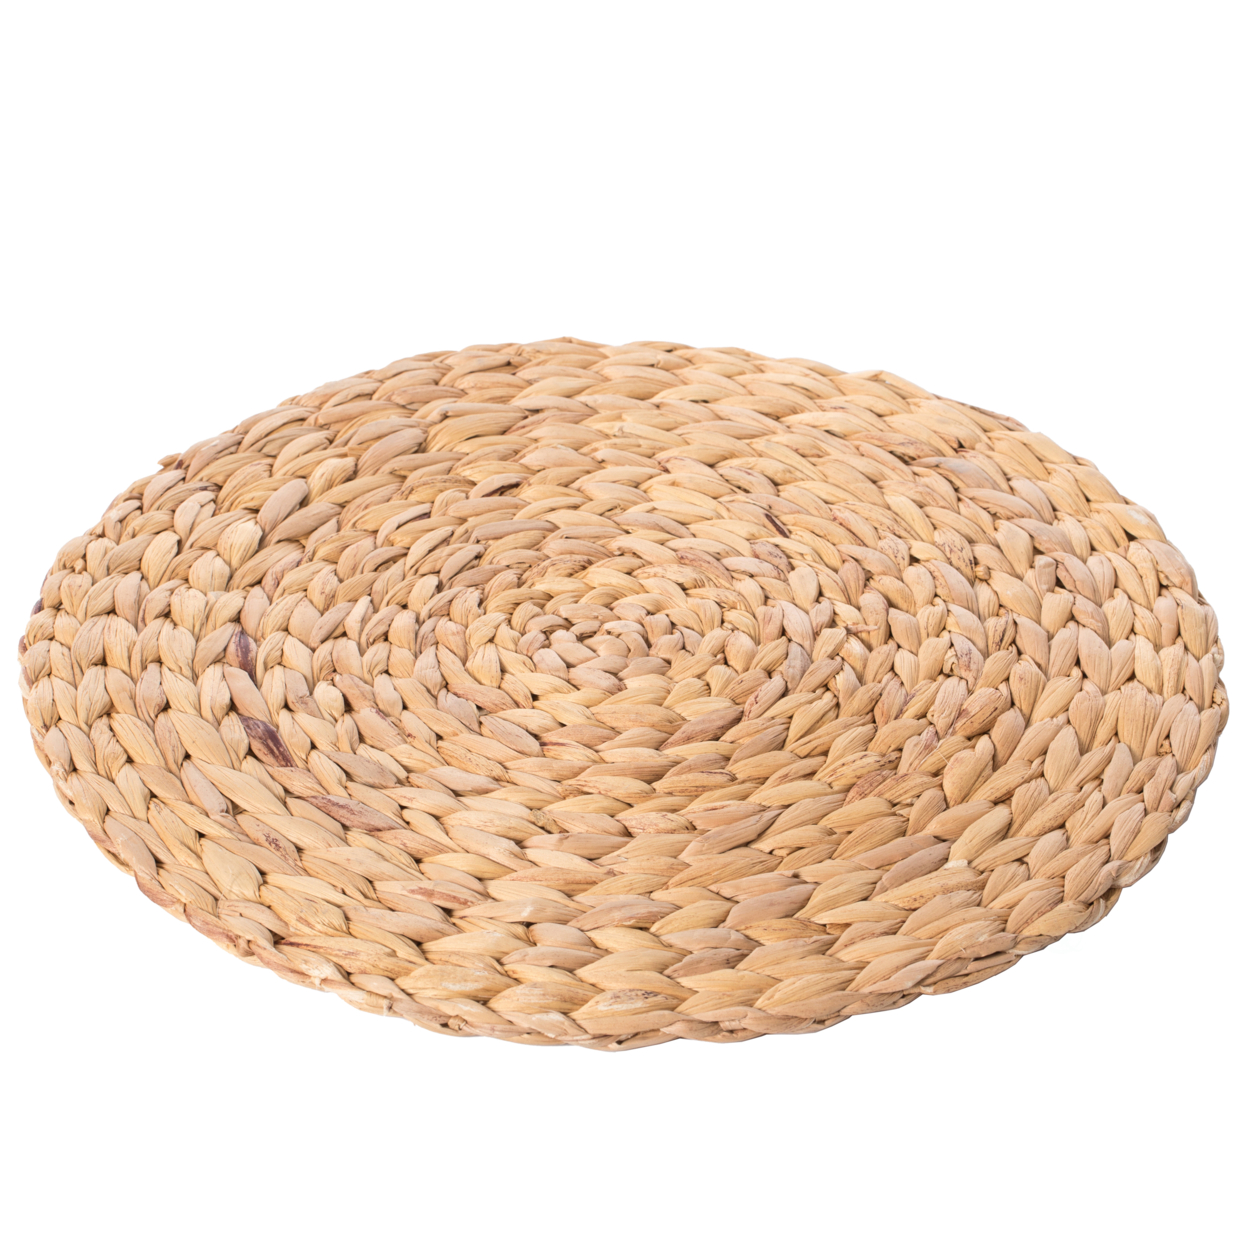 15 Decorative Weave Water Hyacinth Round Mat Charger Plates For Dining Table